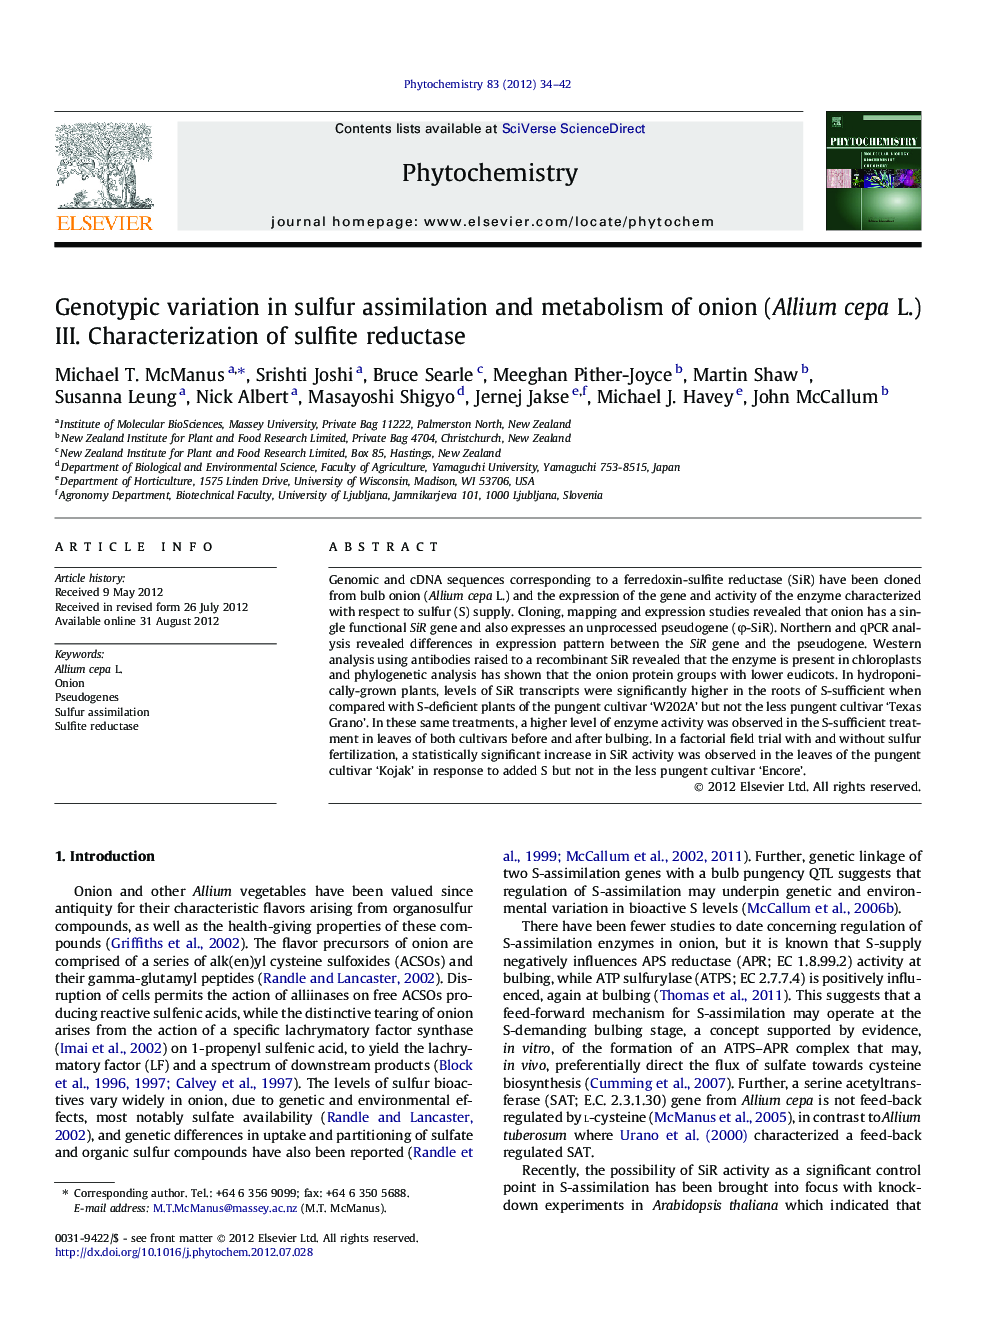 Genotypic variation in sulfur assimilation and metabolism of onion (Allium cepa L.) III. Characterization of sulfite reductase